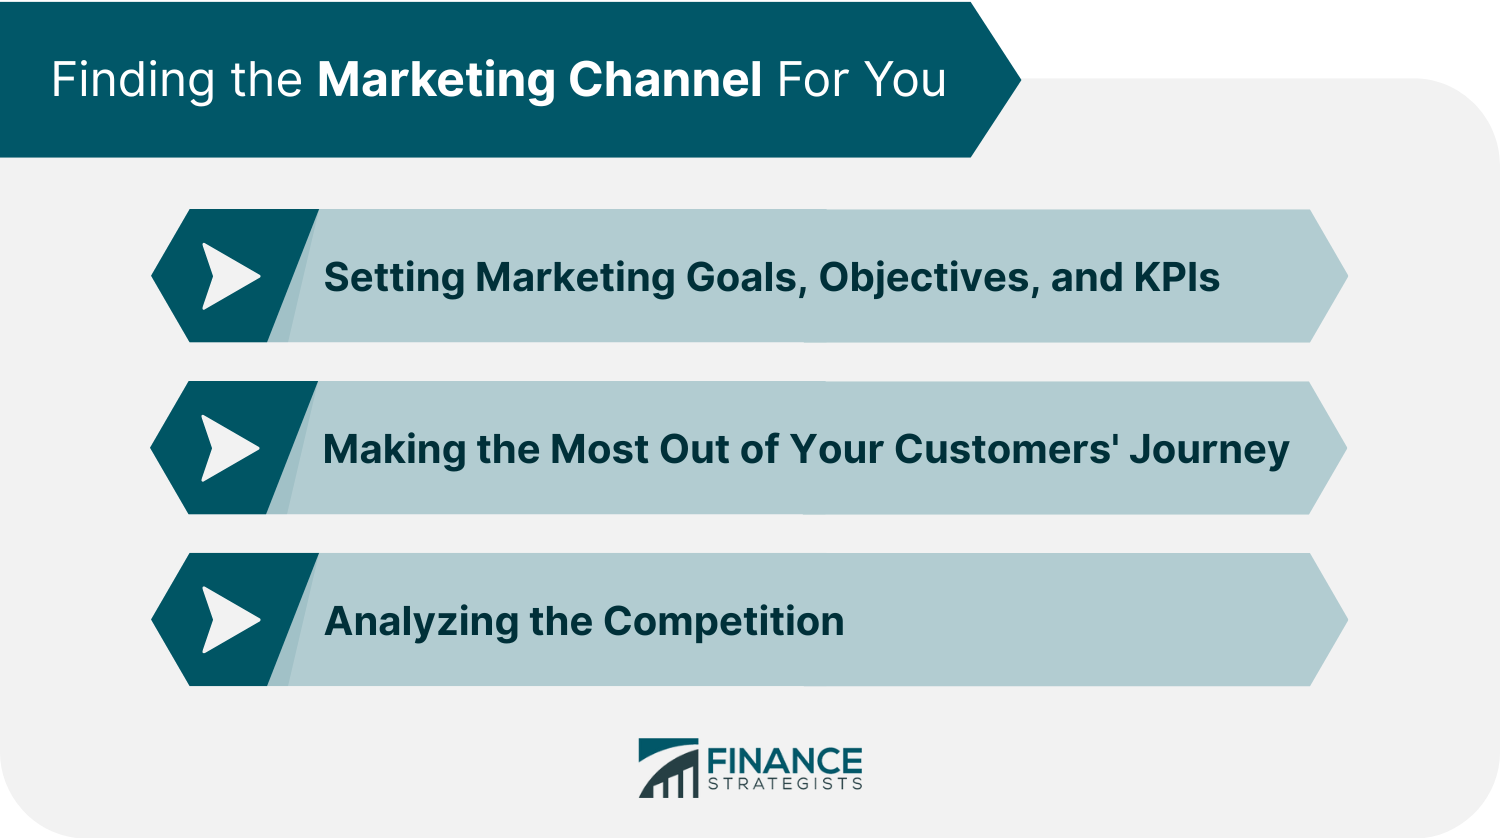 Finding the Marketing Channel For You